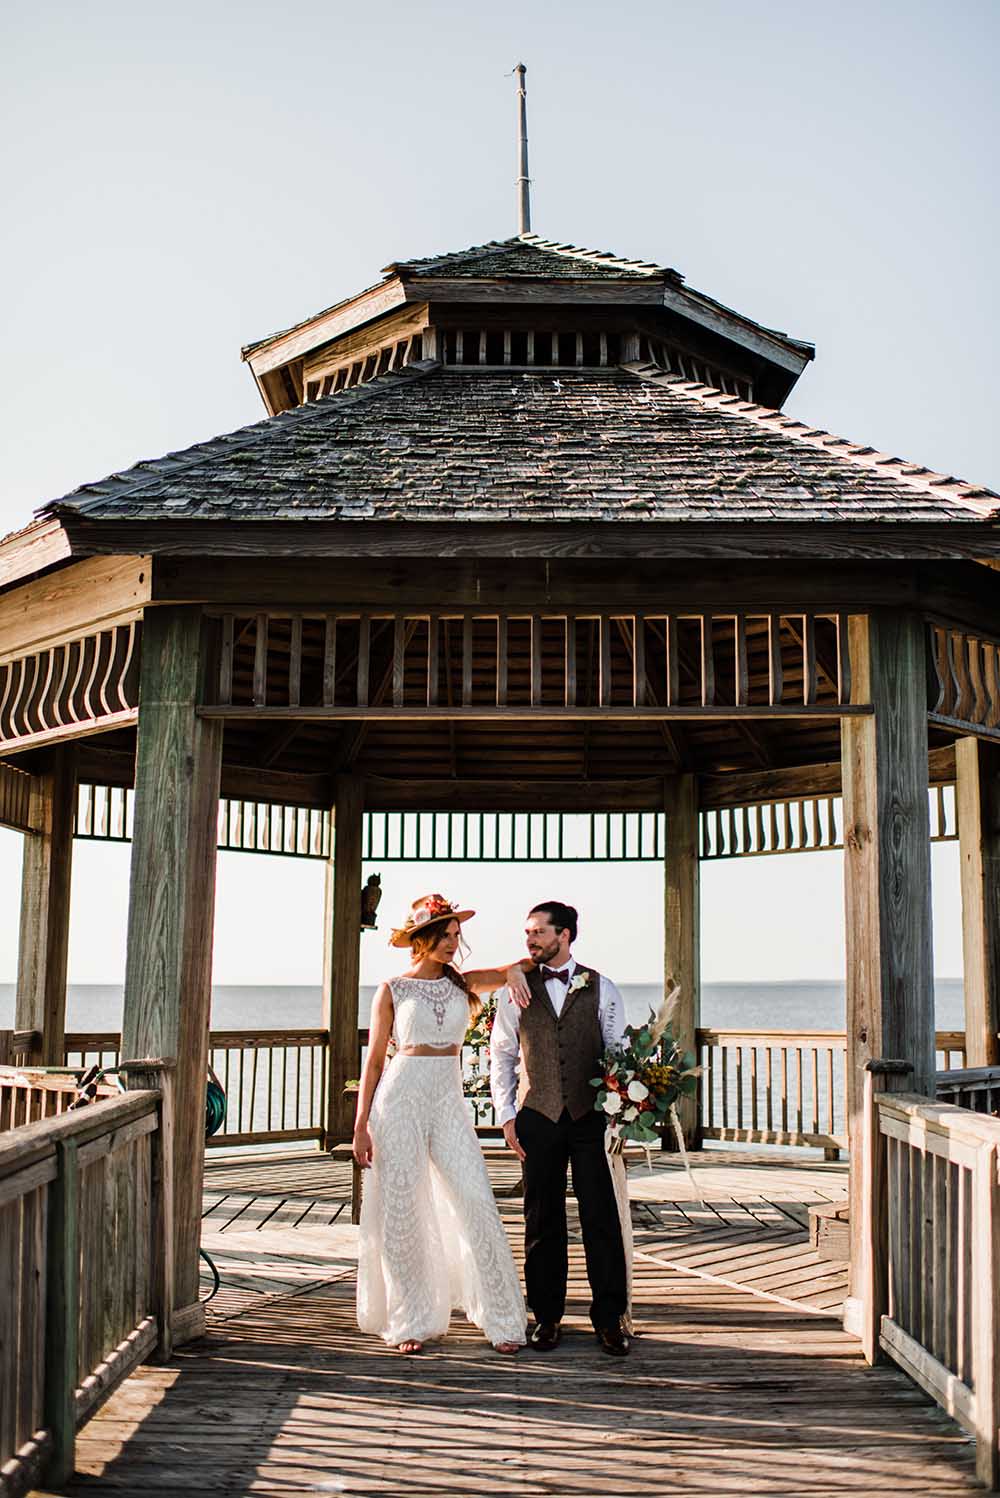 Boho Coastal Microwedding Dinner on Pier | photo by MBM Photography | featured on I Do Y'all